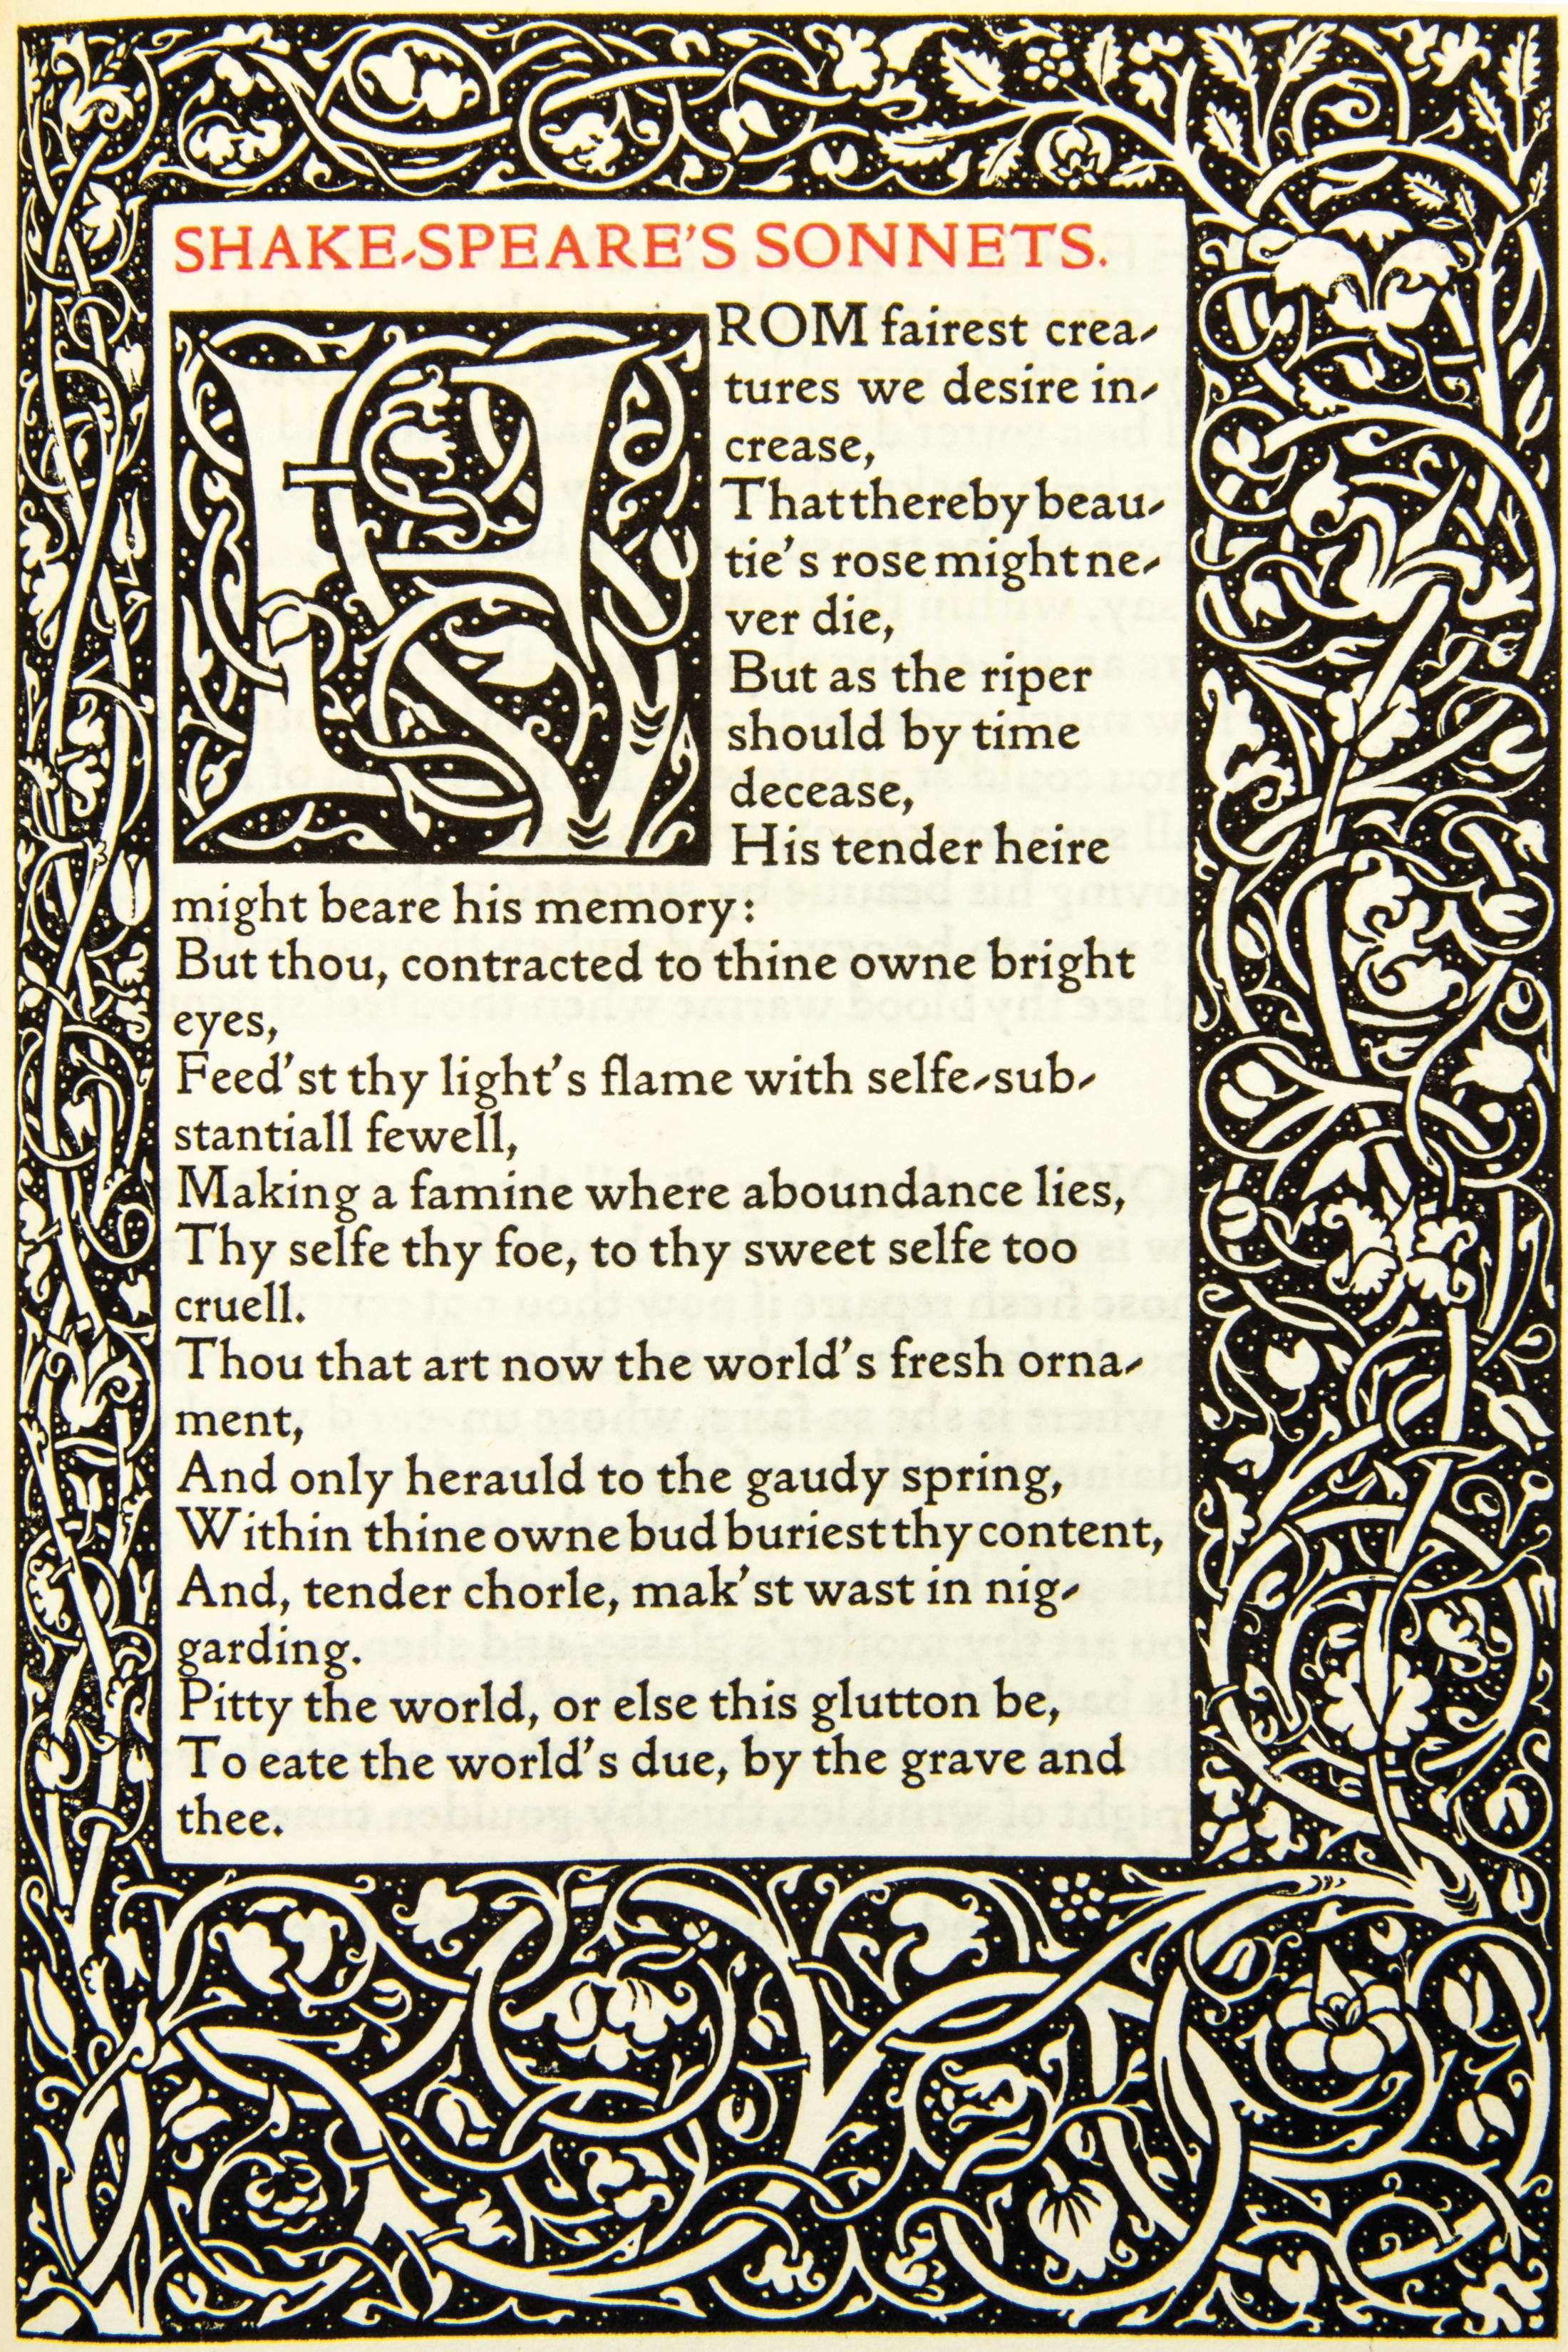 SHAKESPEARE.  The Poems of William Shakespeare.  Edited by Frederick S. Ellis.  216, [2] pp.  8vo., bound by Birdsall in full crimson morocco, elaborately gilt-stamped framed covers and spines, gilt-stamped raised bands, gilt-ruled and lettered